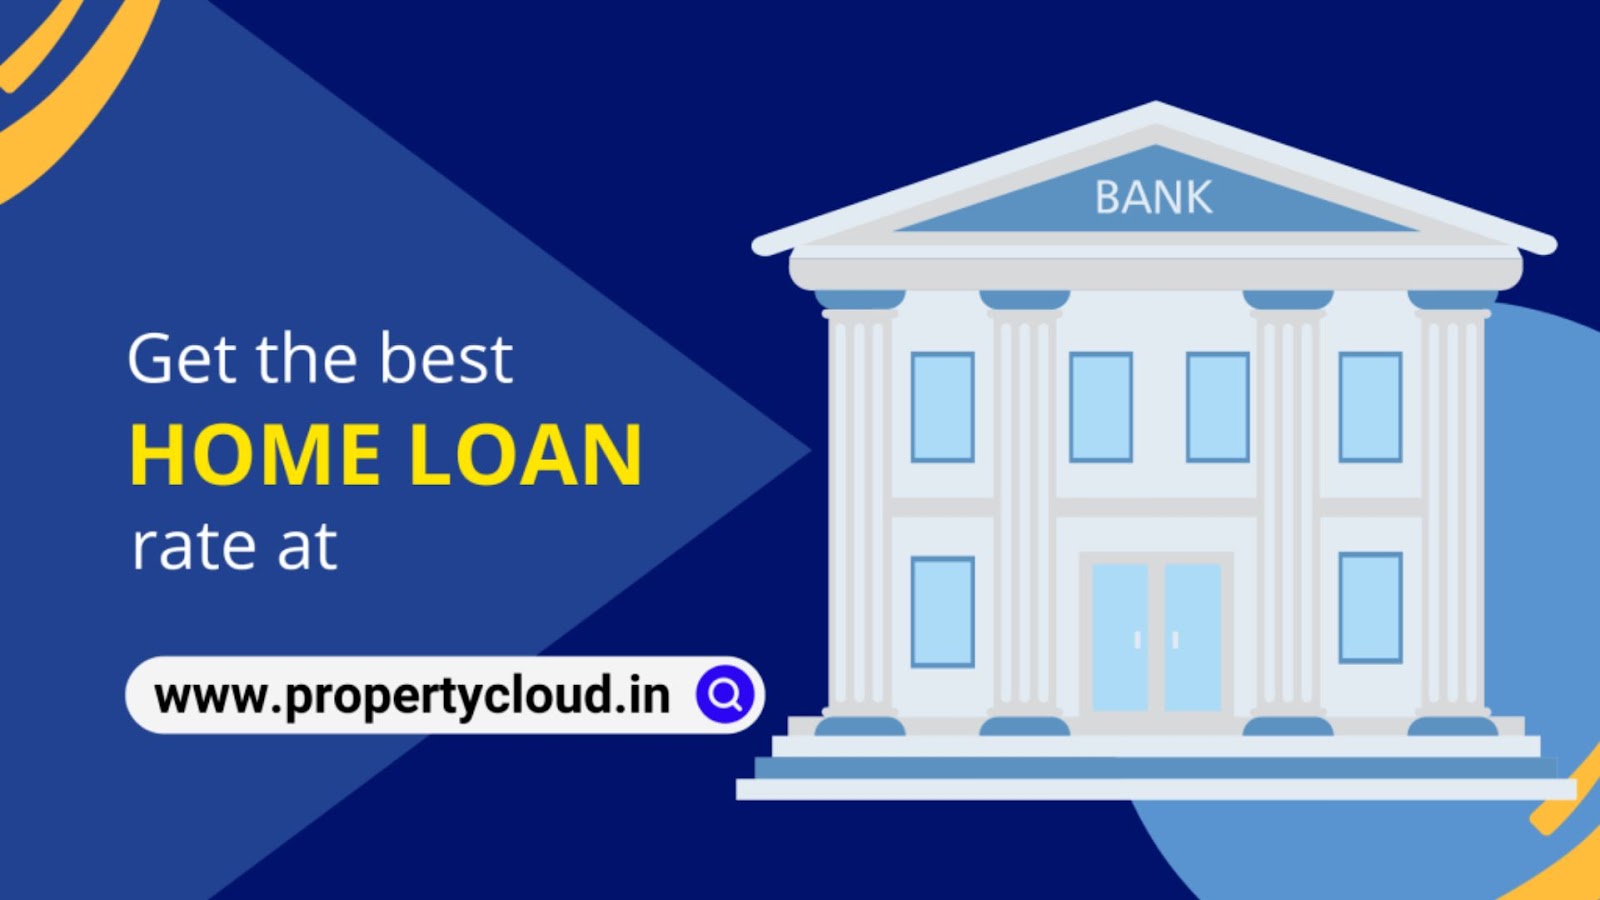 Contact PropertyCloud loan experts for the best guidance related to loans and tax, etc.